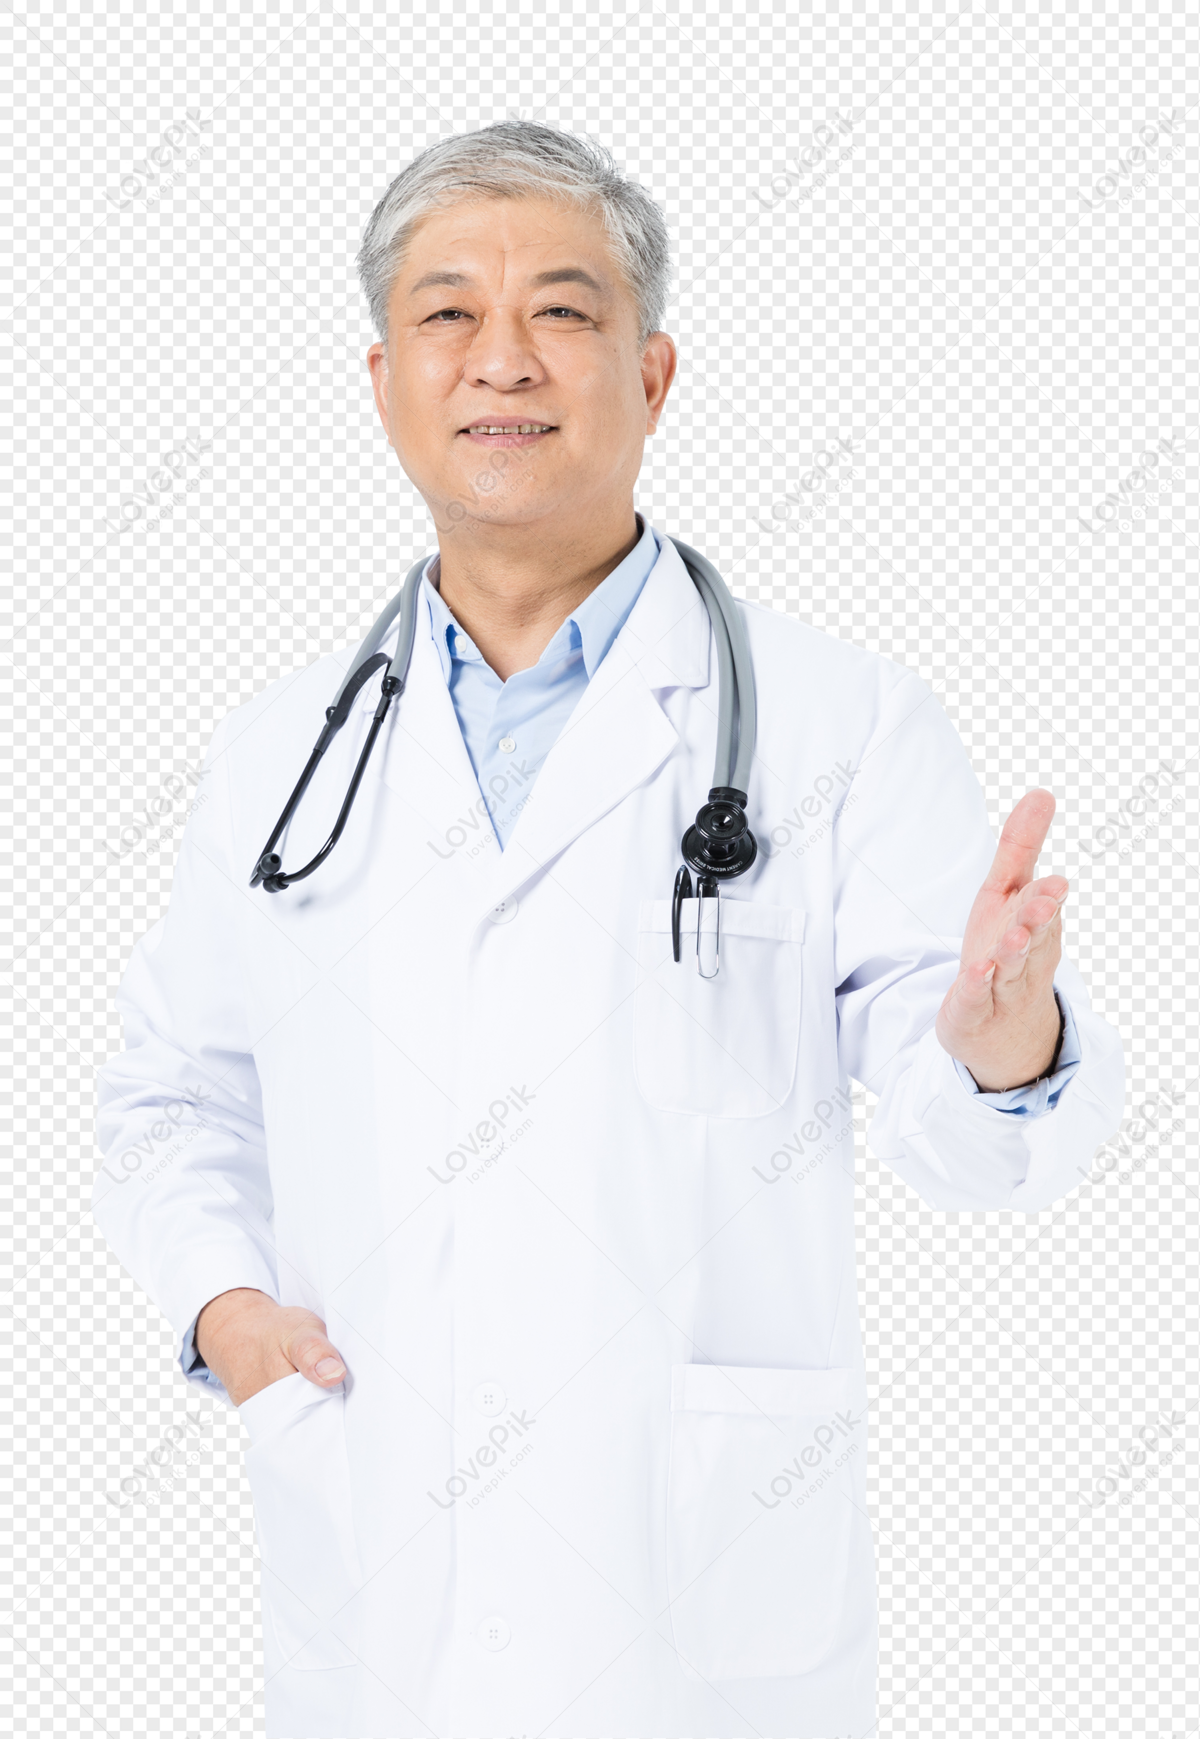 clinician-png-images-with-transparent-background-free-download-on-lovepik